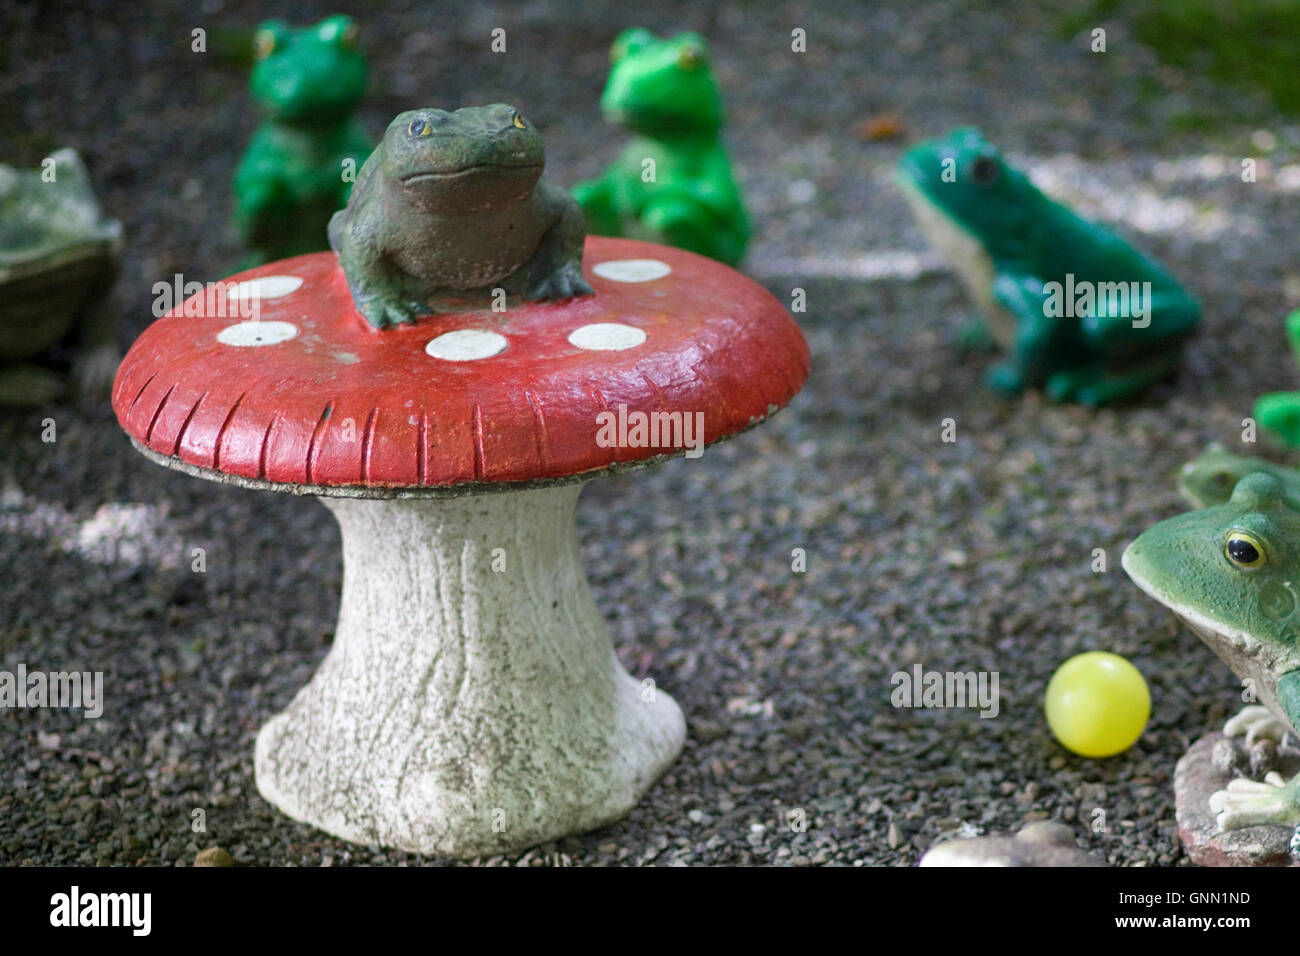 Statue of a toad sitting on top of a Fly agaric mushroom Stock Photo